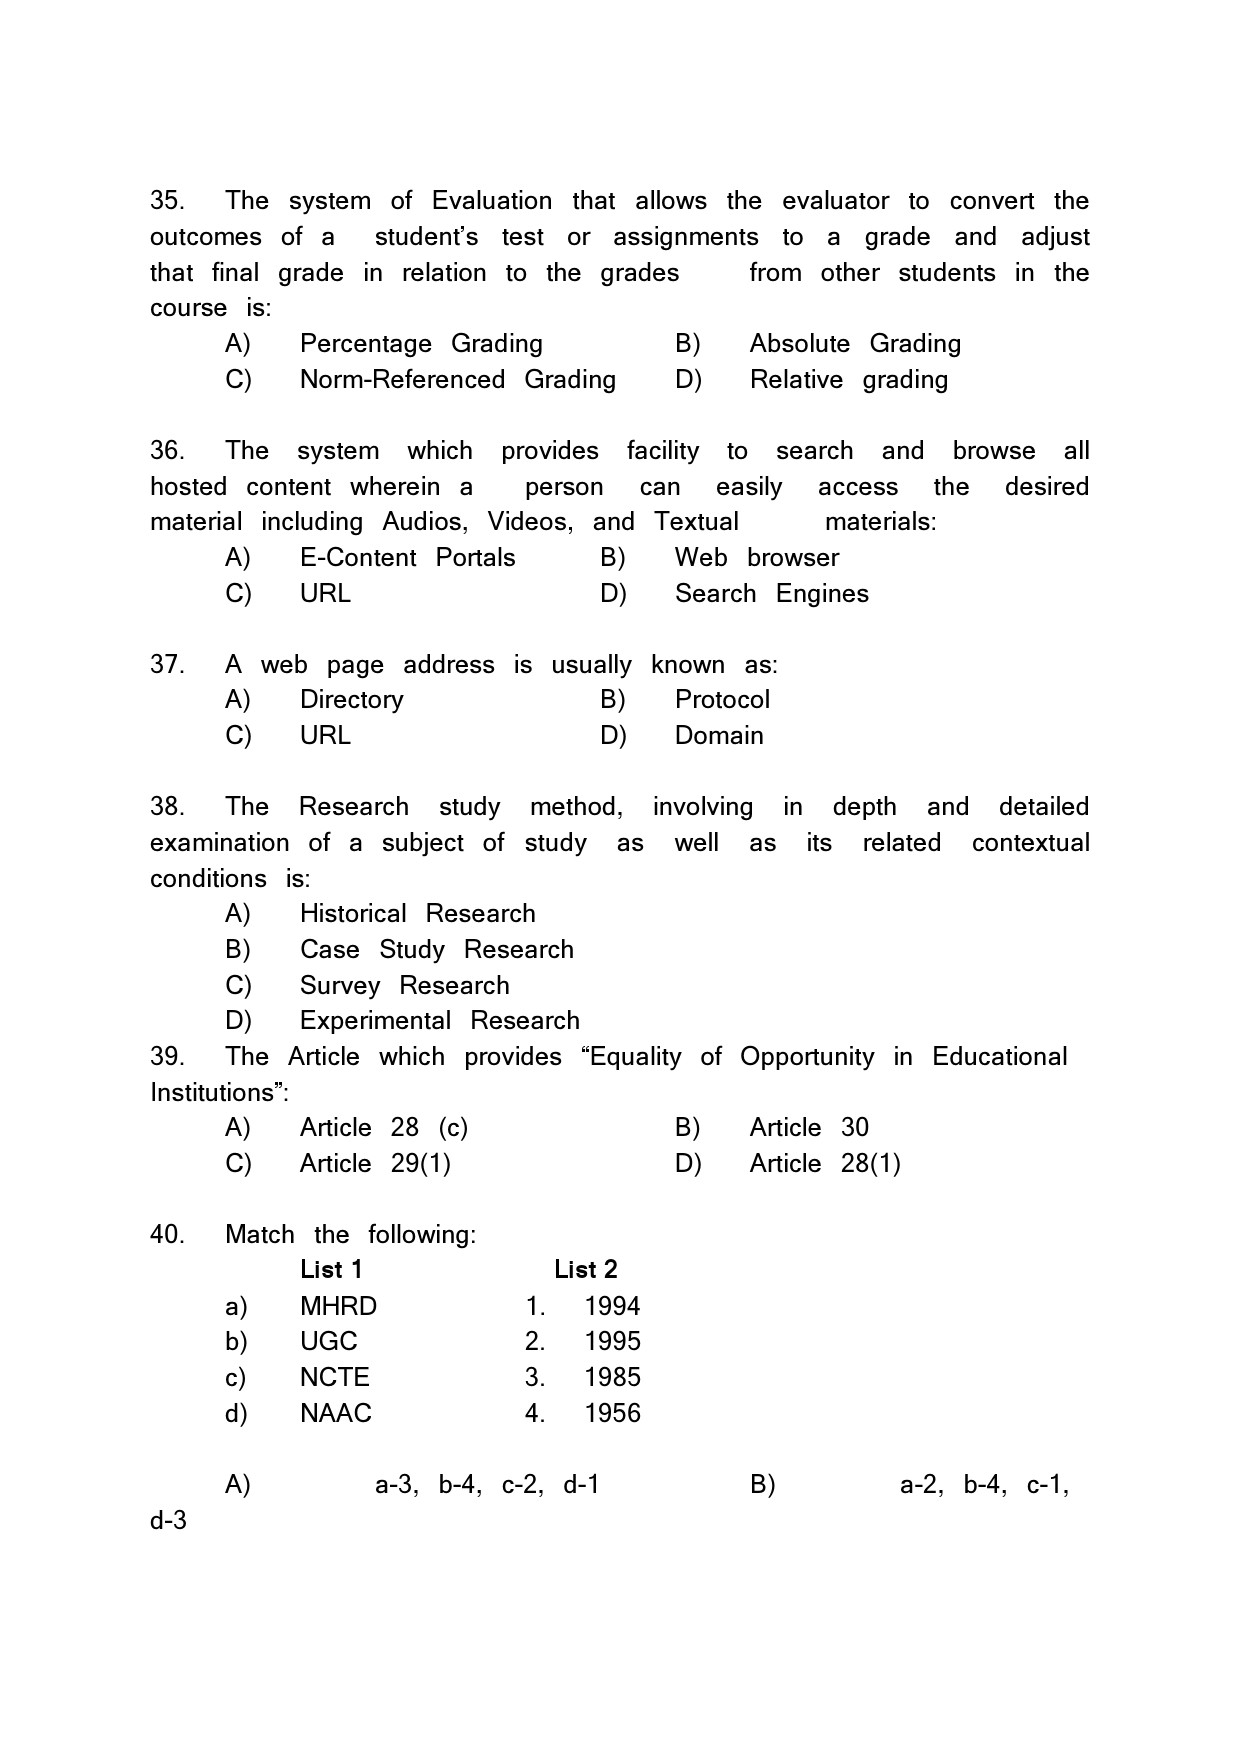 Kerala SET General Knowledge Exam Question Paper February 2020 6